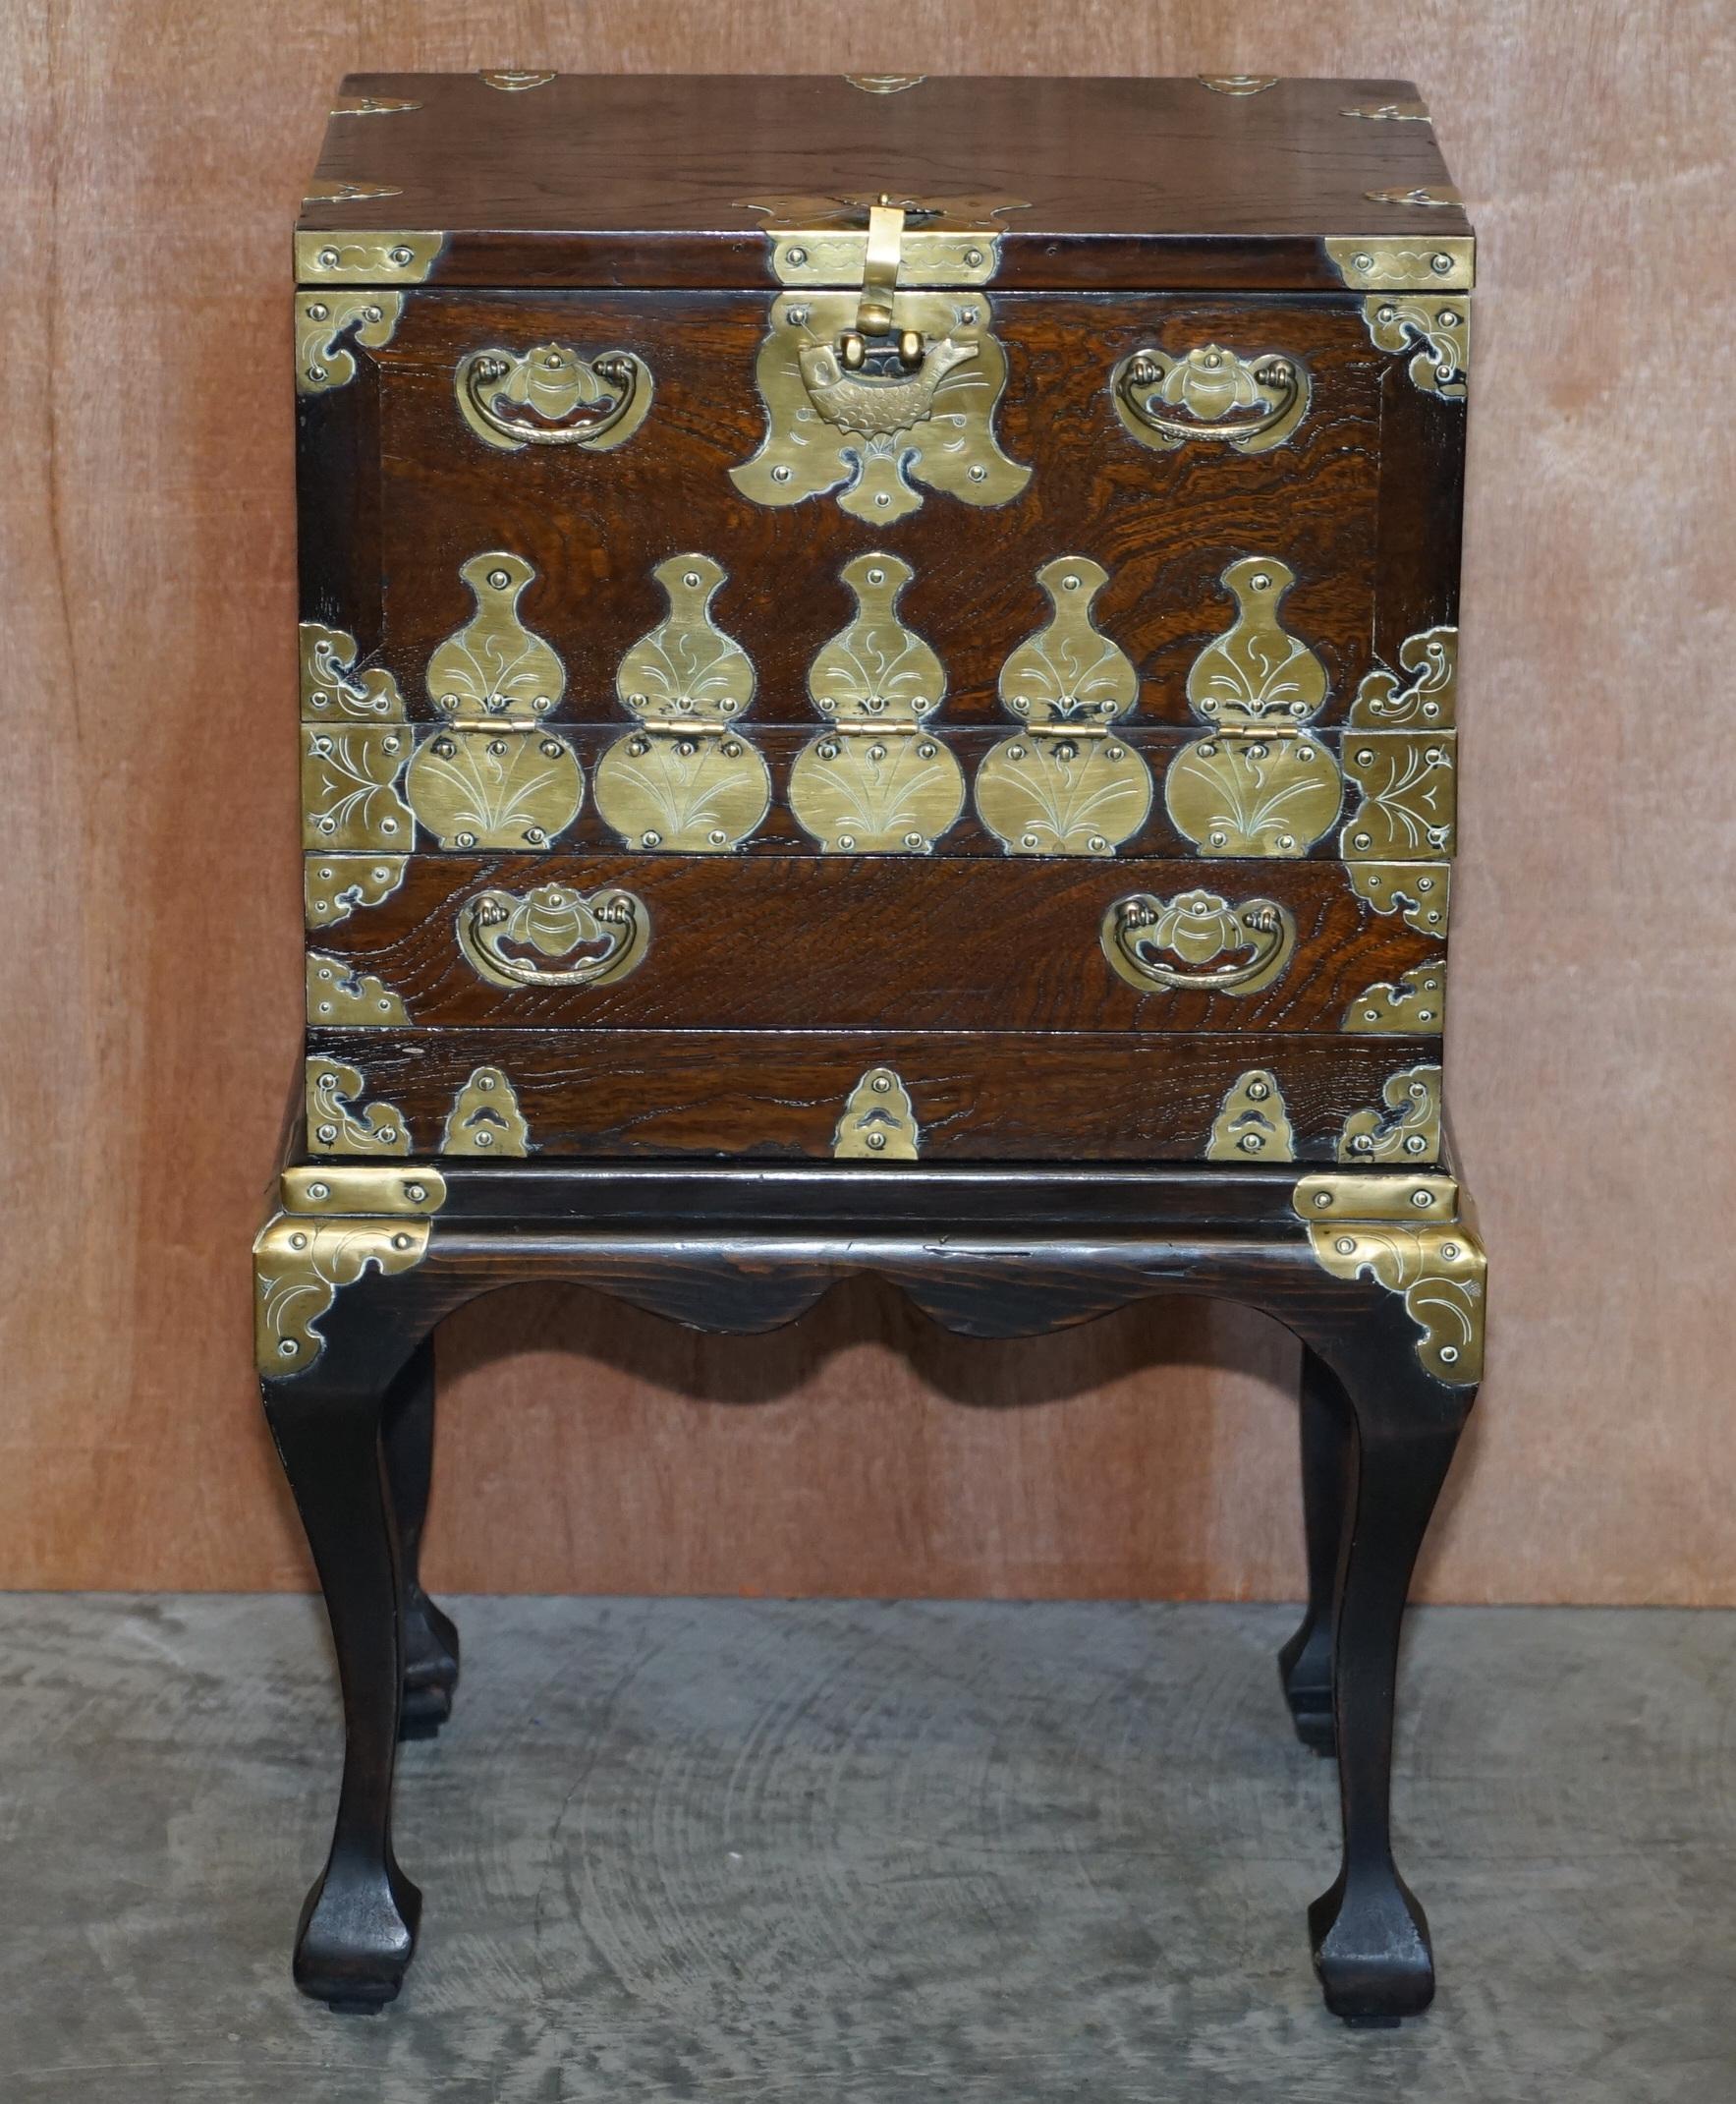 We are delighted to offer for sale this lovely original antique Japanese Elm & polished brass chest on stand

A very good looking well made and decorative piece. The chest is an ideal lamp or wine table size, it has a large top cupboard section,